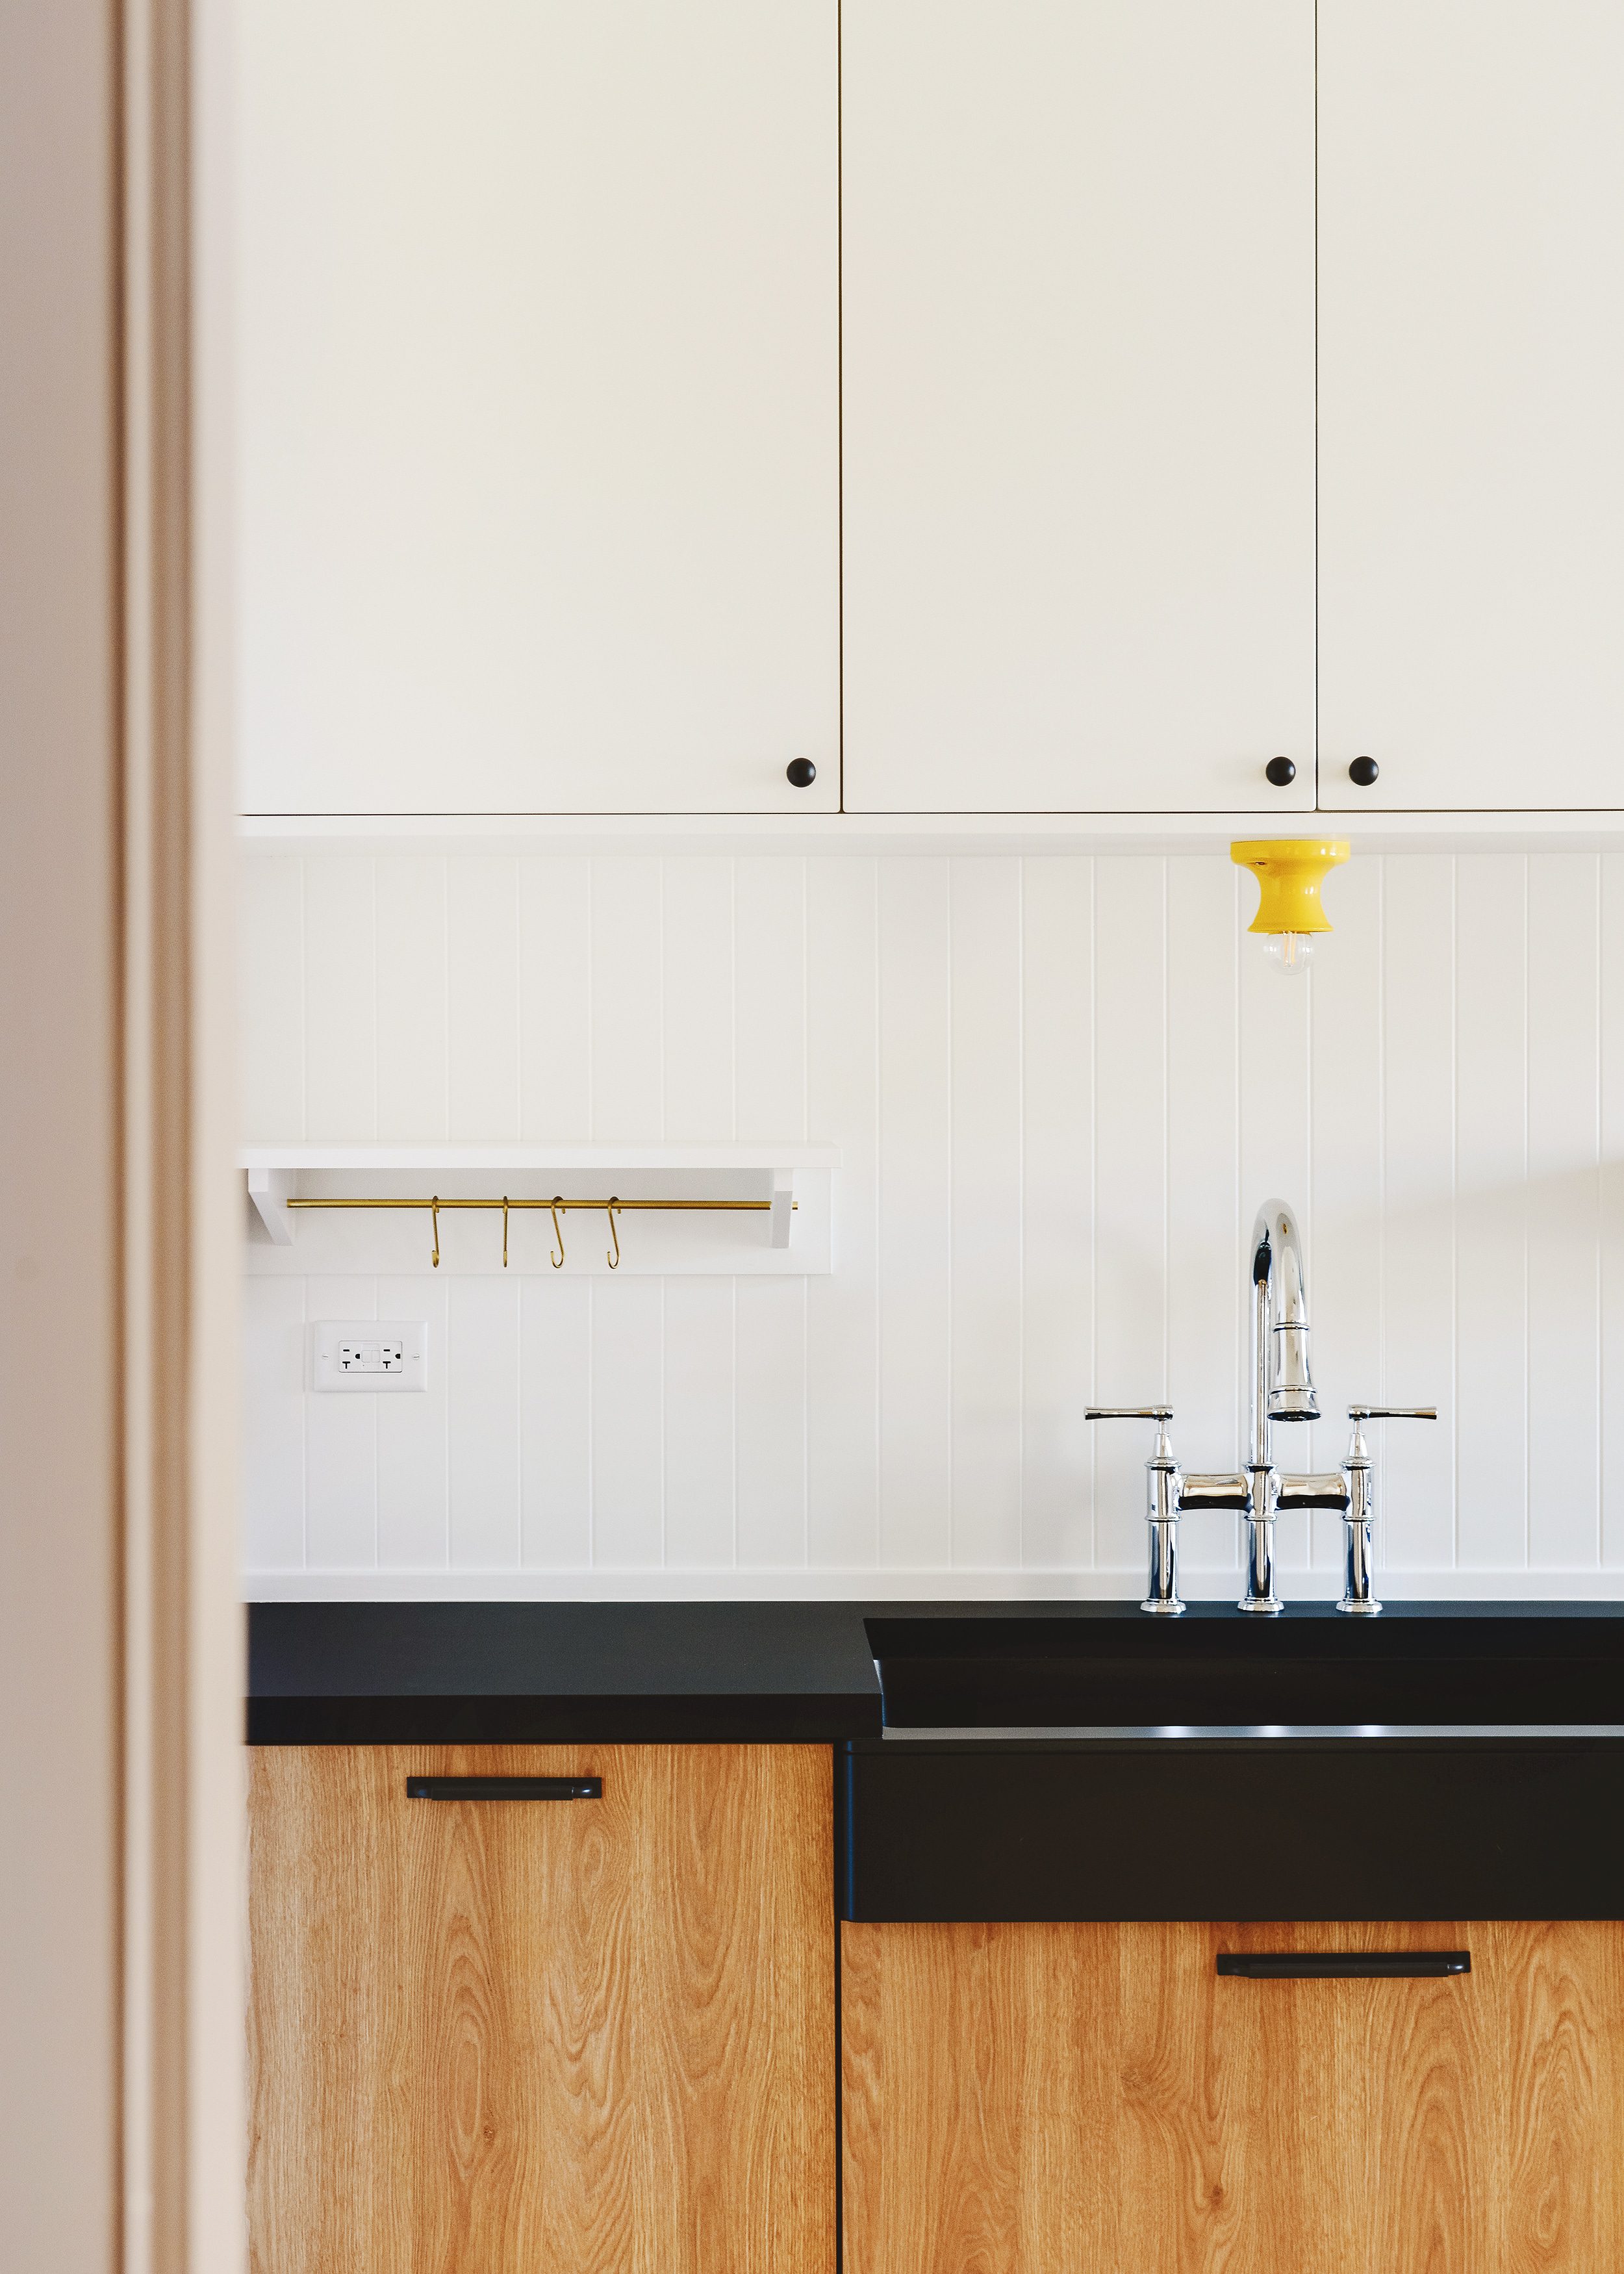 Everything You Want to Know About Our Formica Countertops! - Yellow Brick  Home